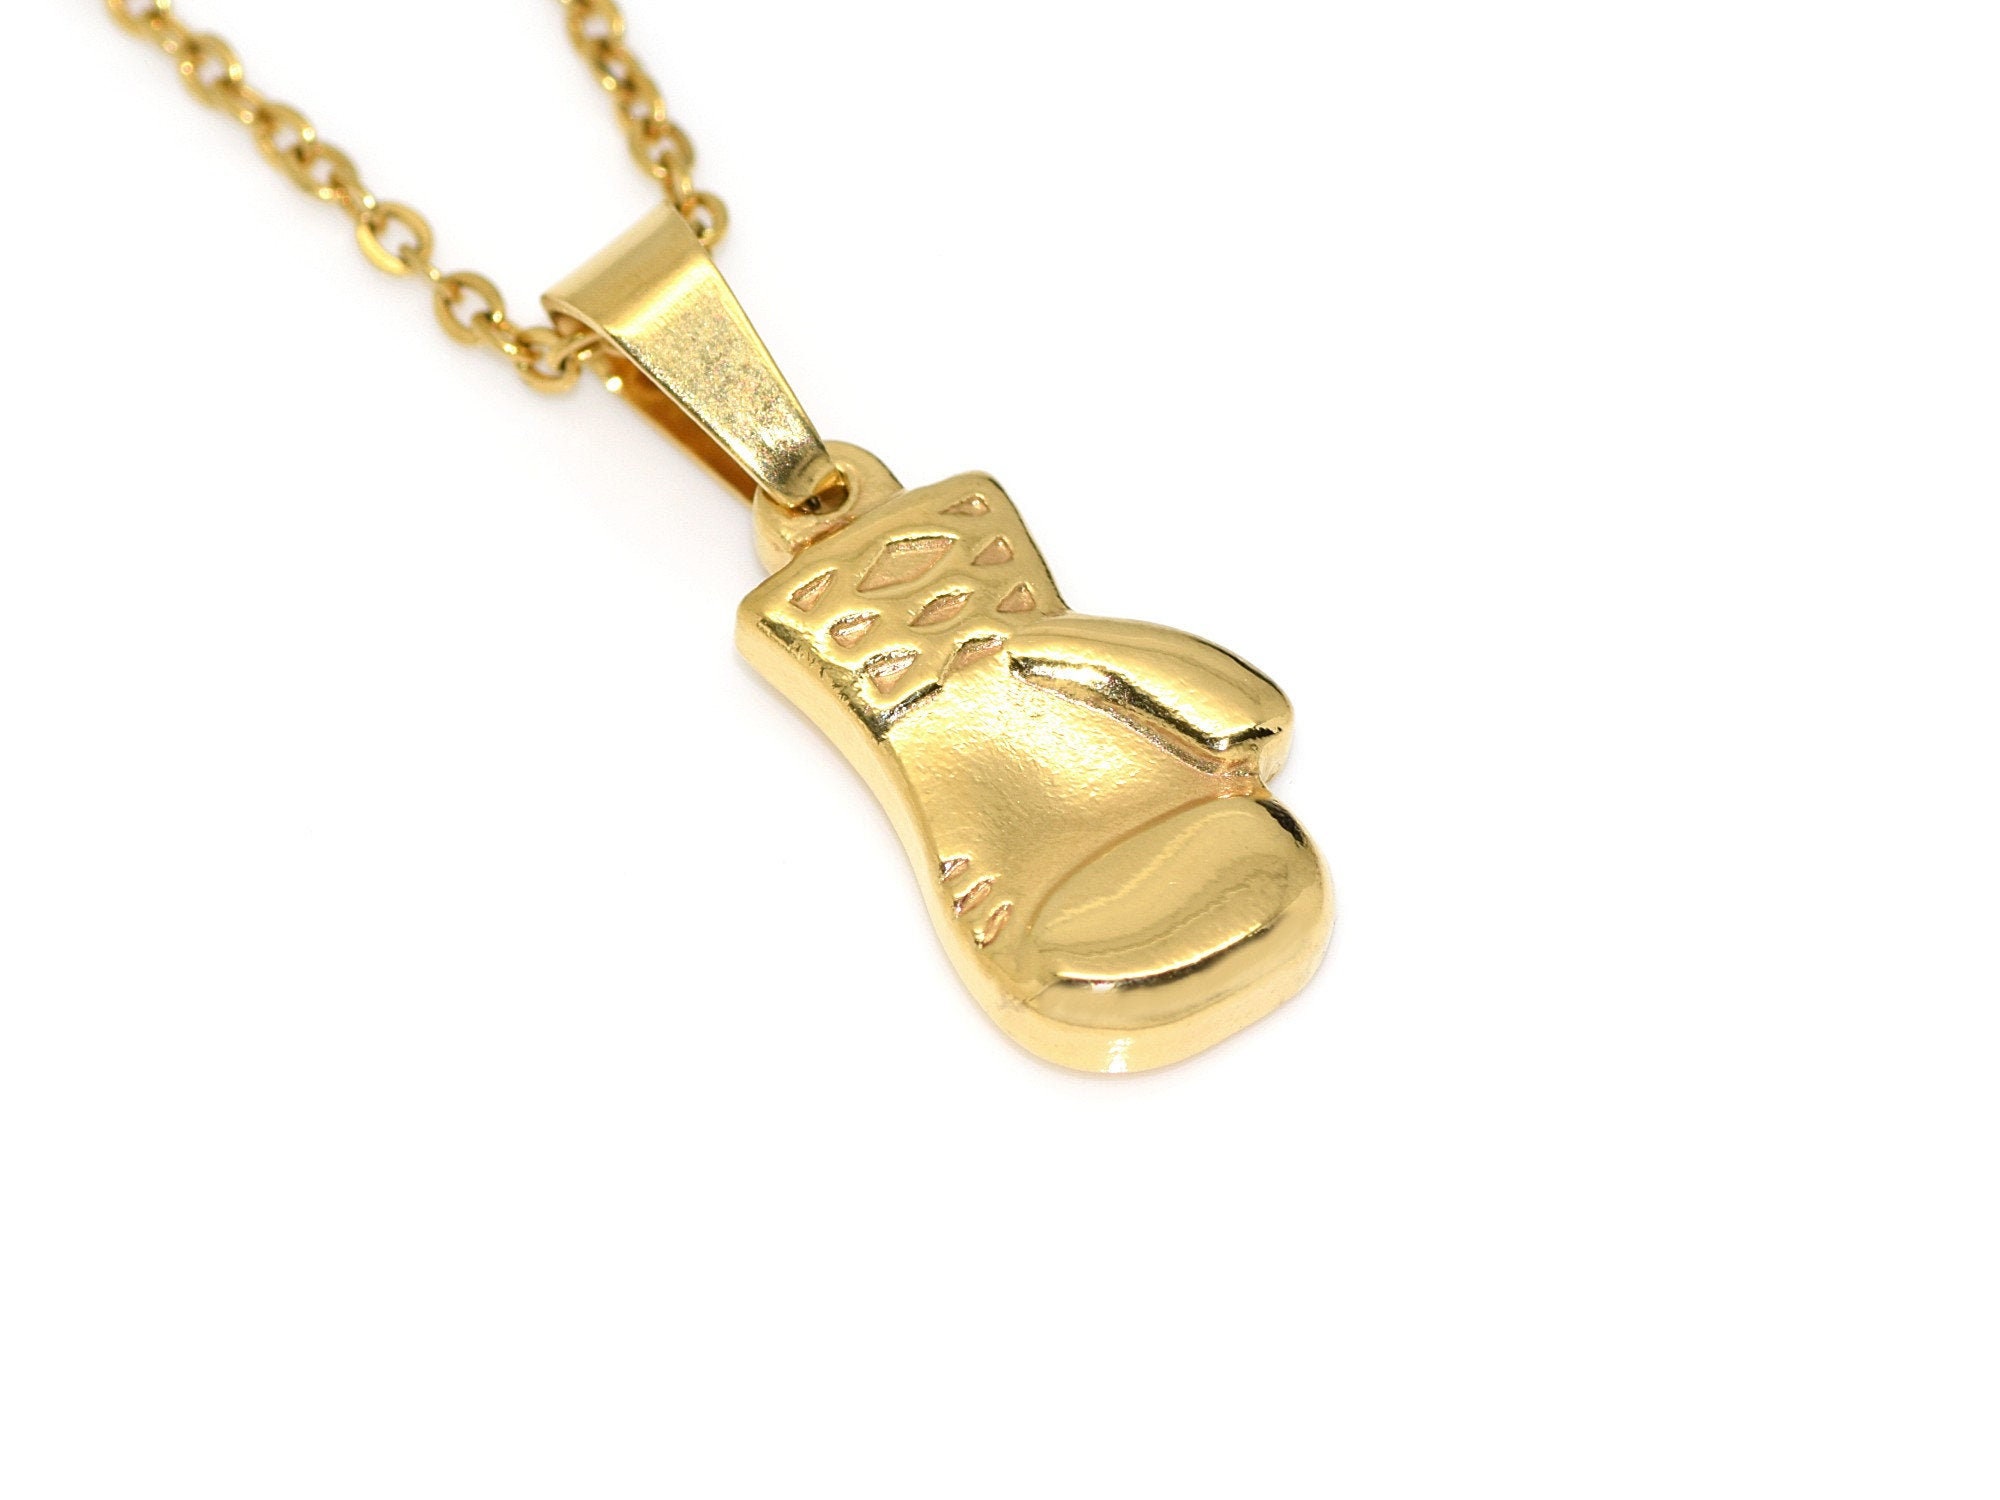 BOXING NECKLACE URN IN 14 KARAT YELLOW GOLD